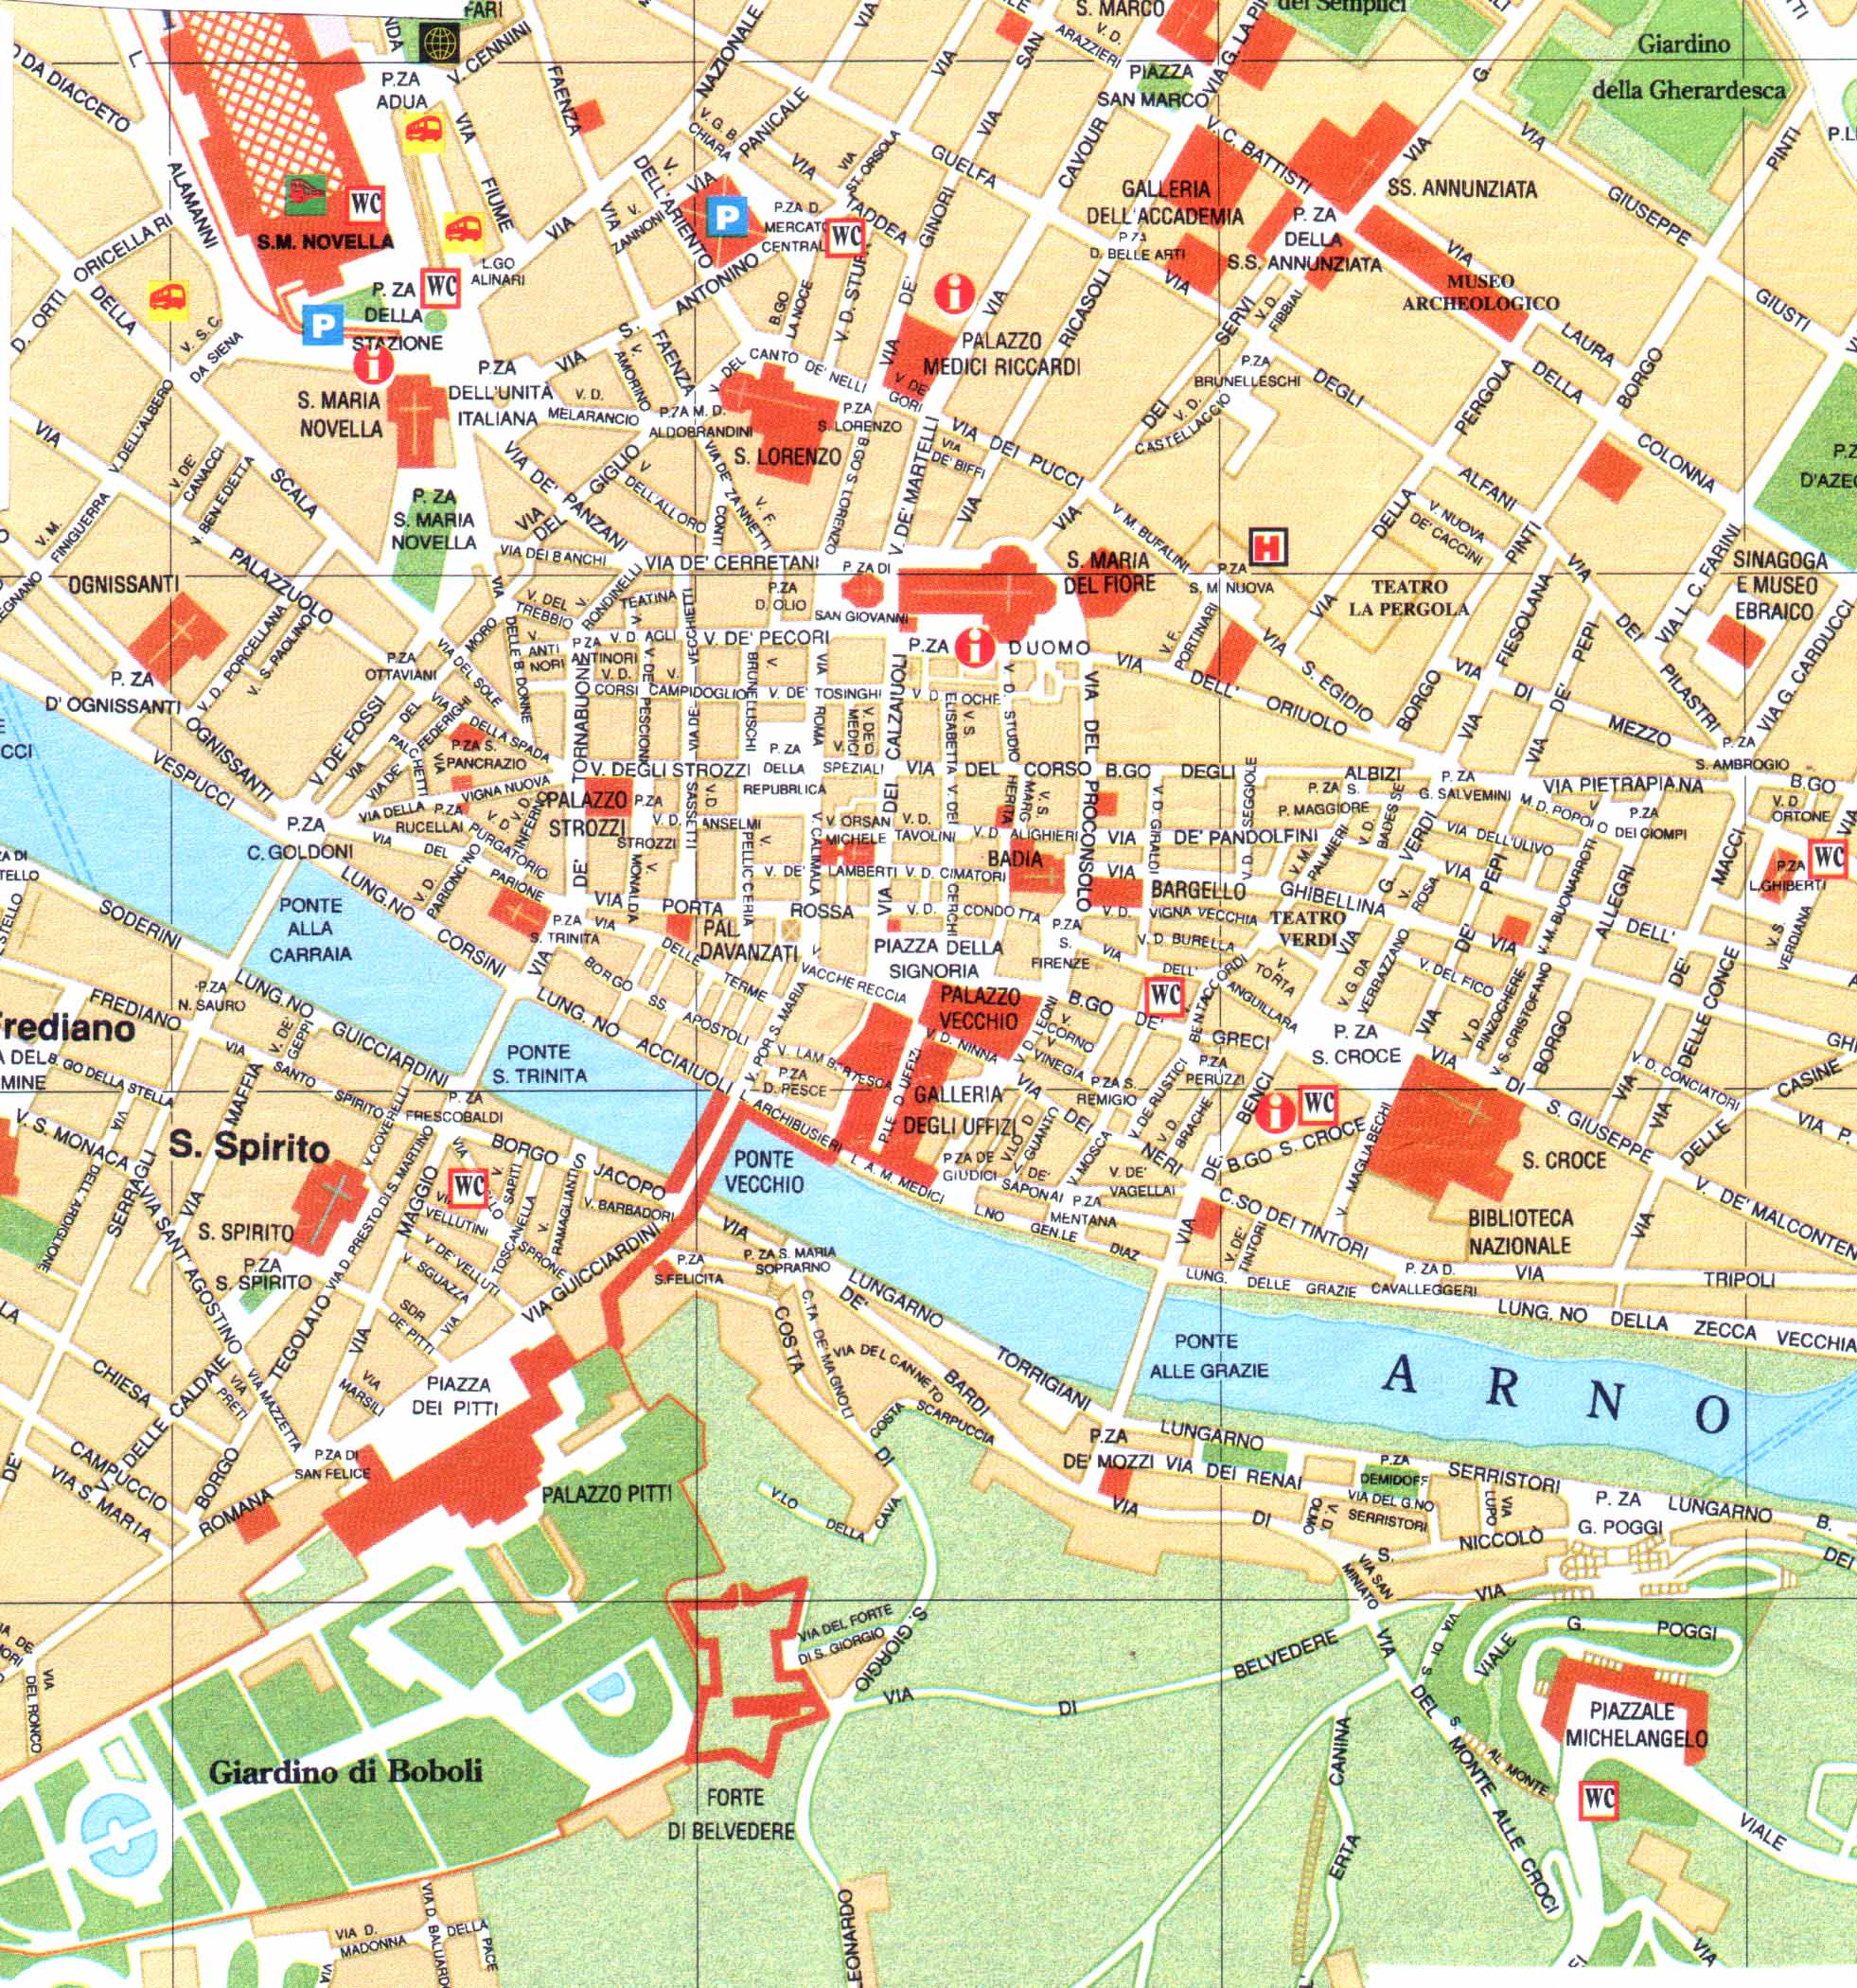 Florence city center map